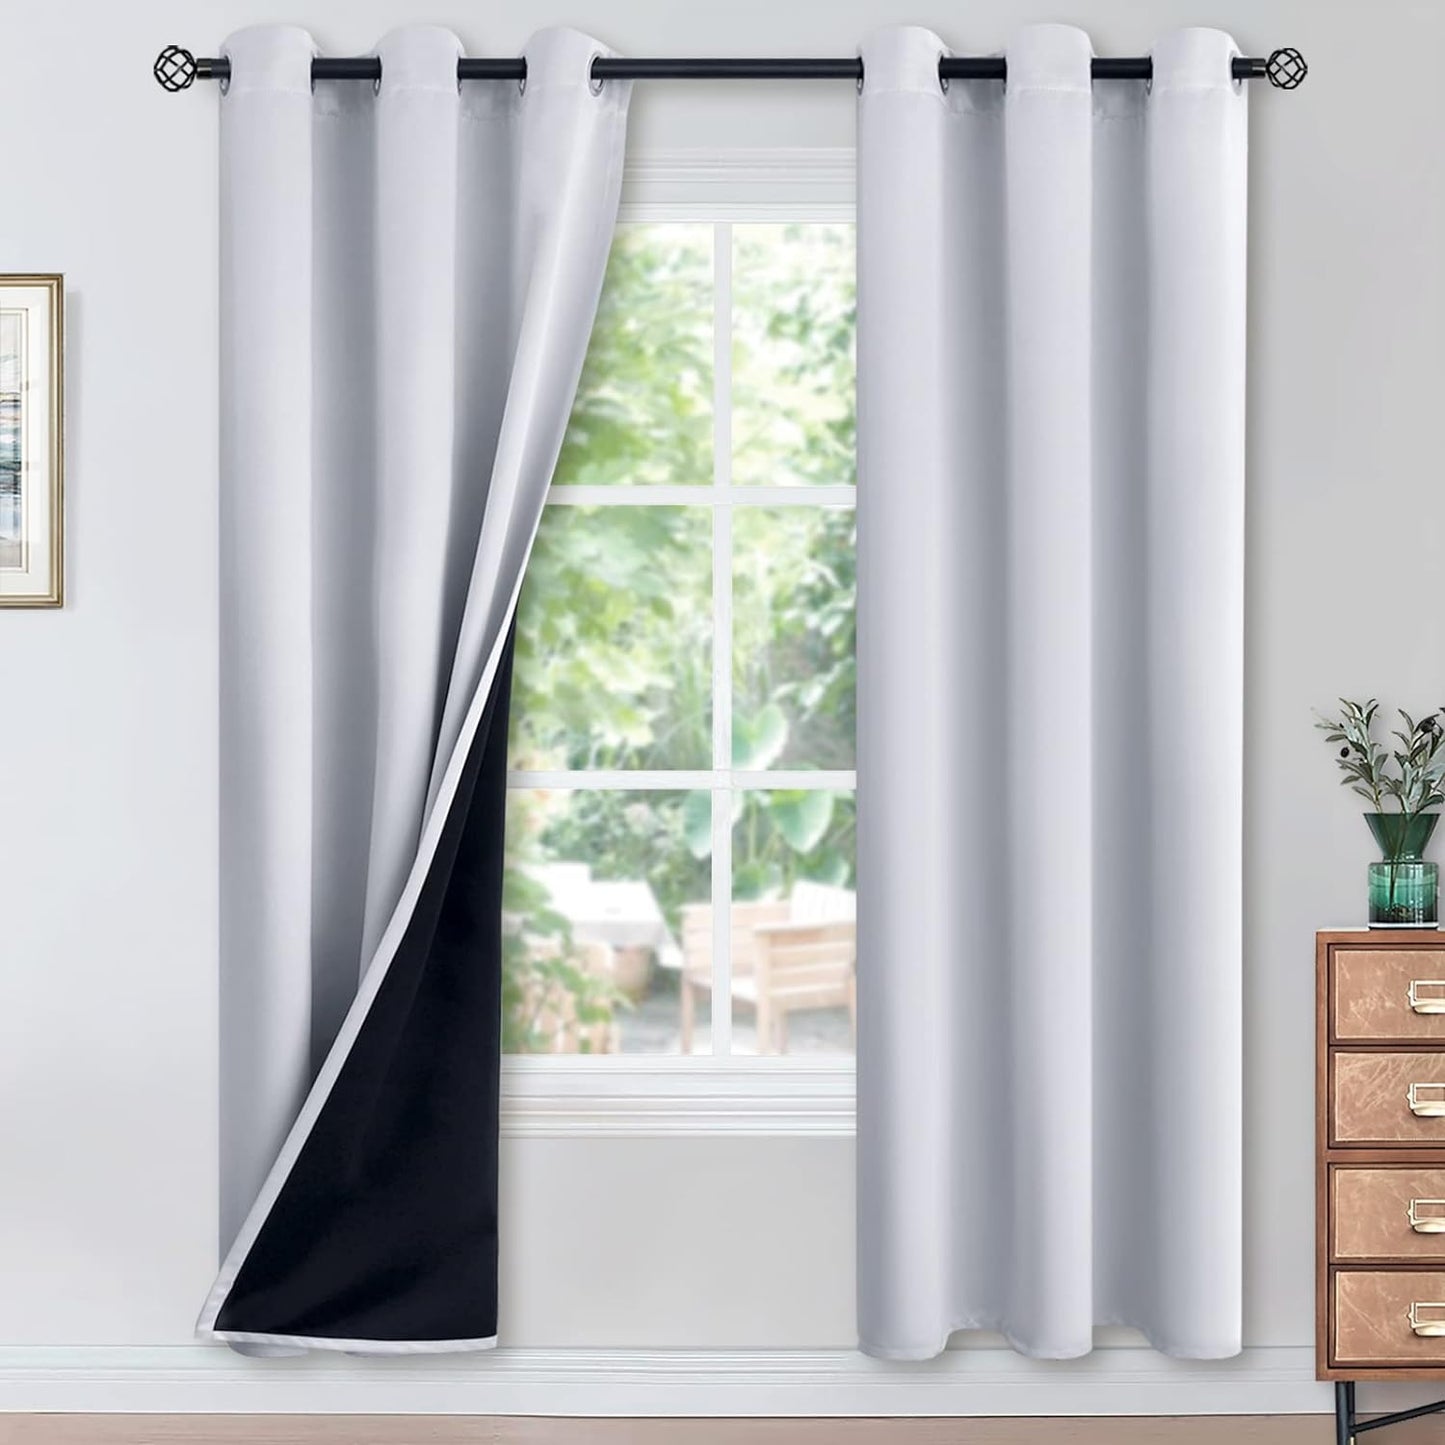 Youngstex Black 100% Blackout Curtains 63 Inches for Bedroom Thermal Insulated Total Room Darkening Curtains for Living Room Window with Black Back Grommet, 2 Panels, 42 X 63 Inch  YoungsTex Greyish White 42W X 84L 